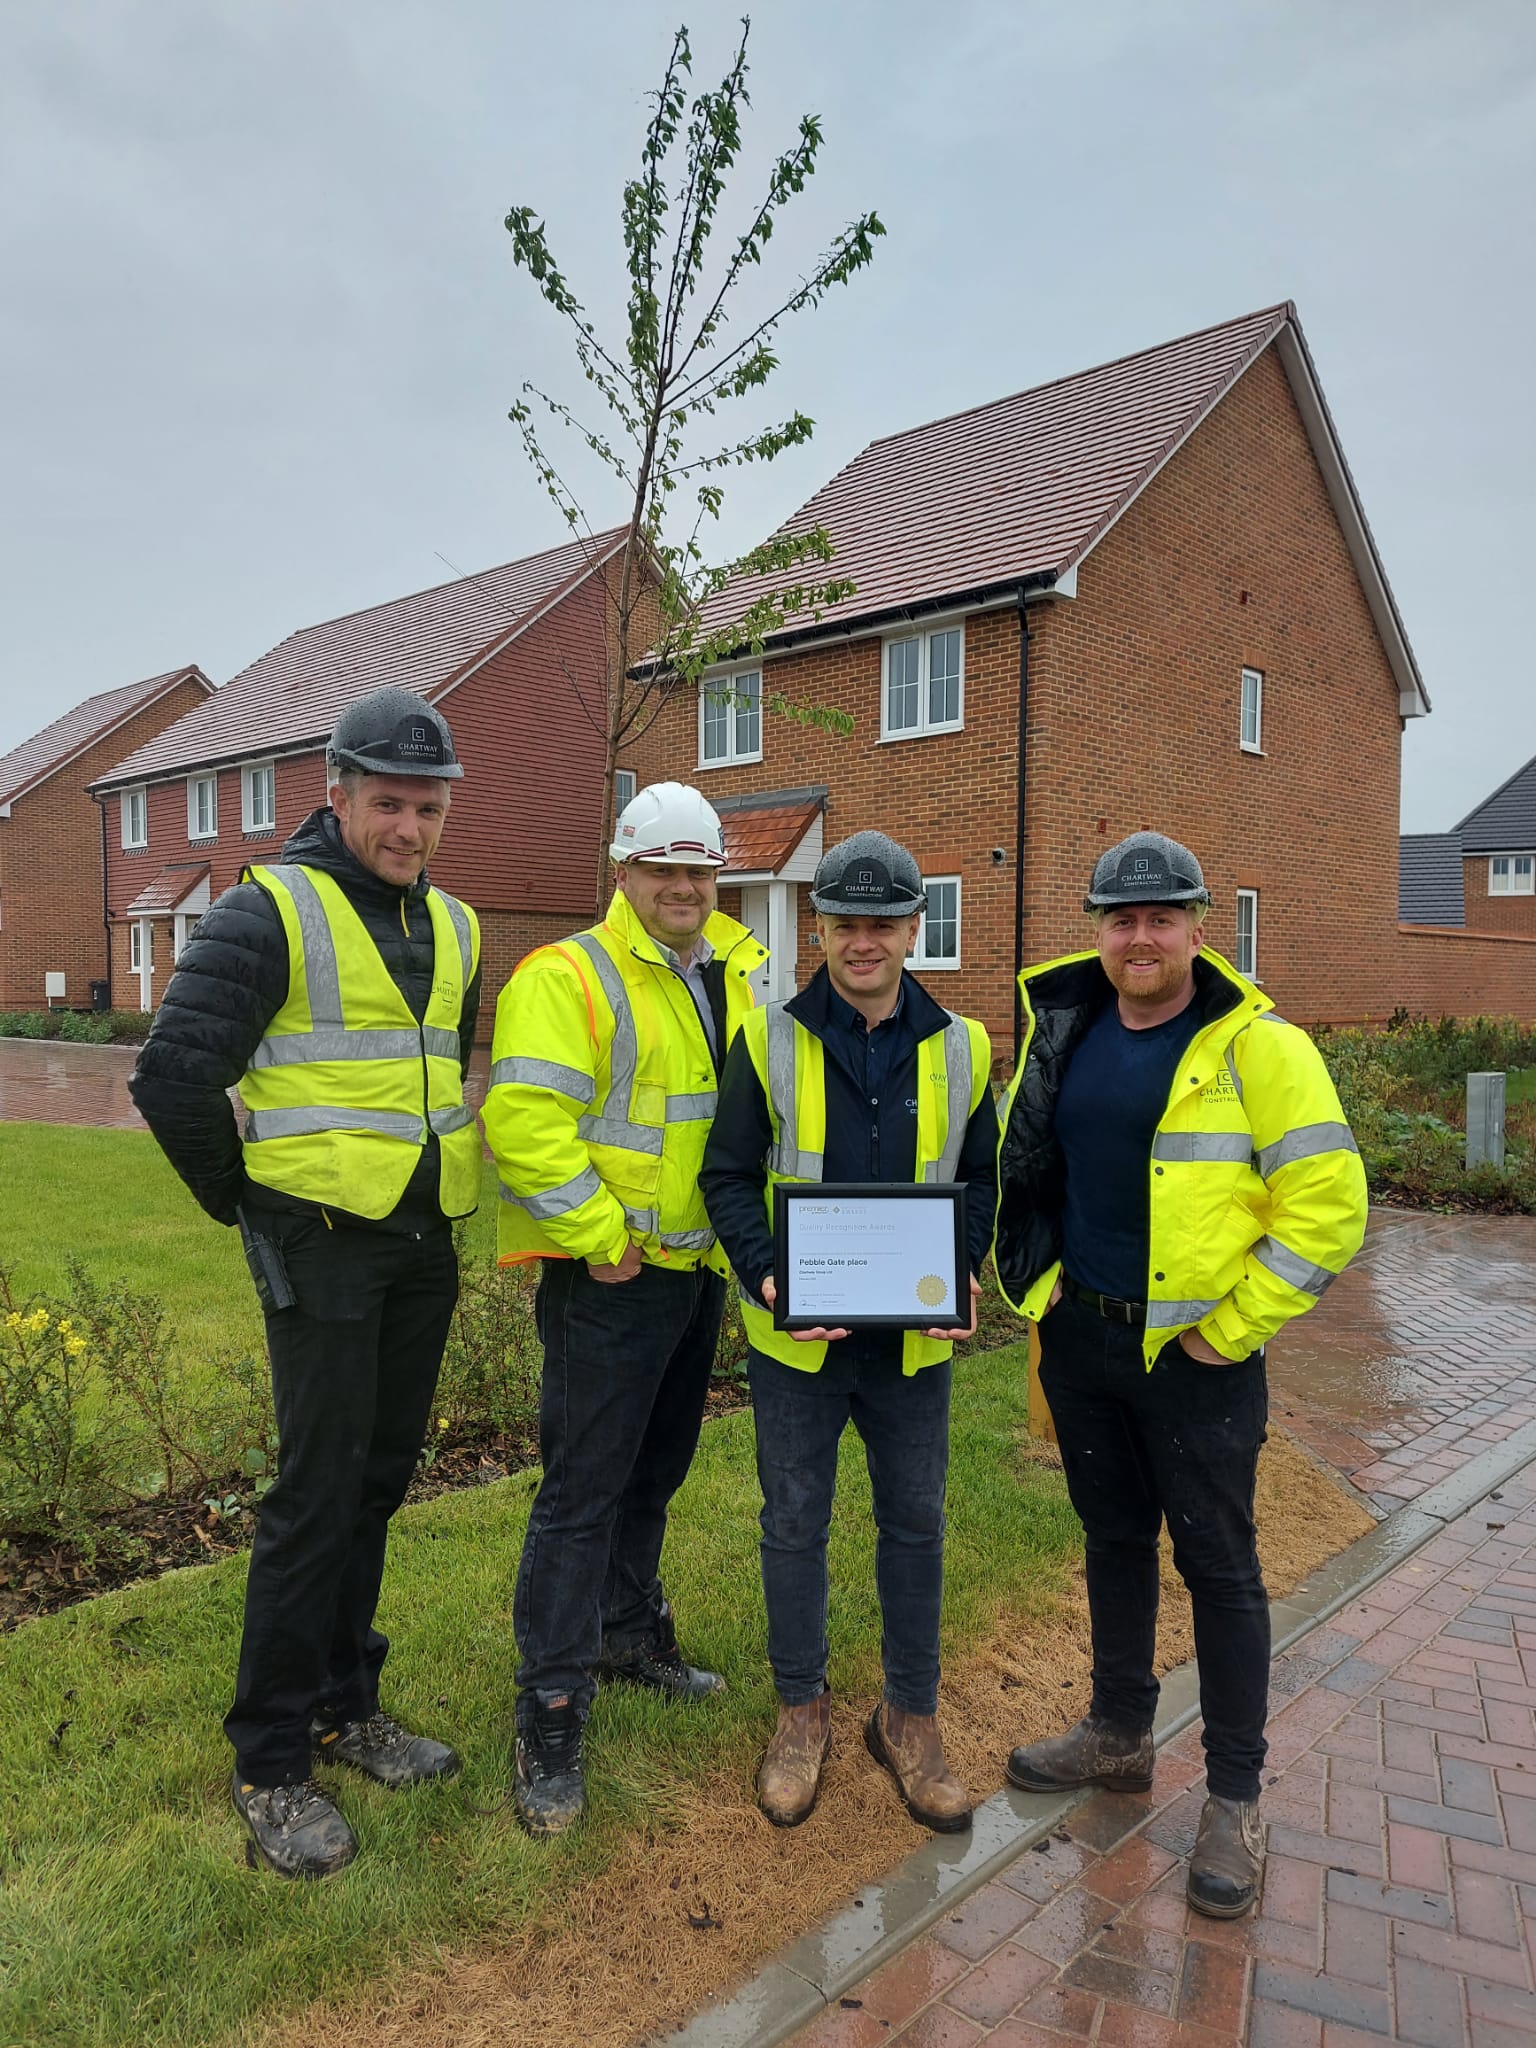 Premier Quality Recognition Award presented to our site team at Pebble Gate Place, Sandwich.